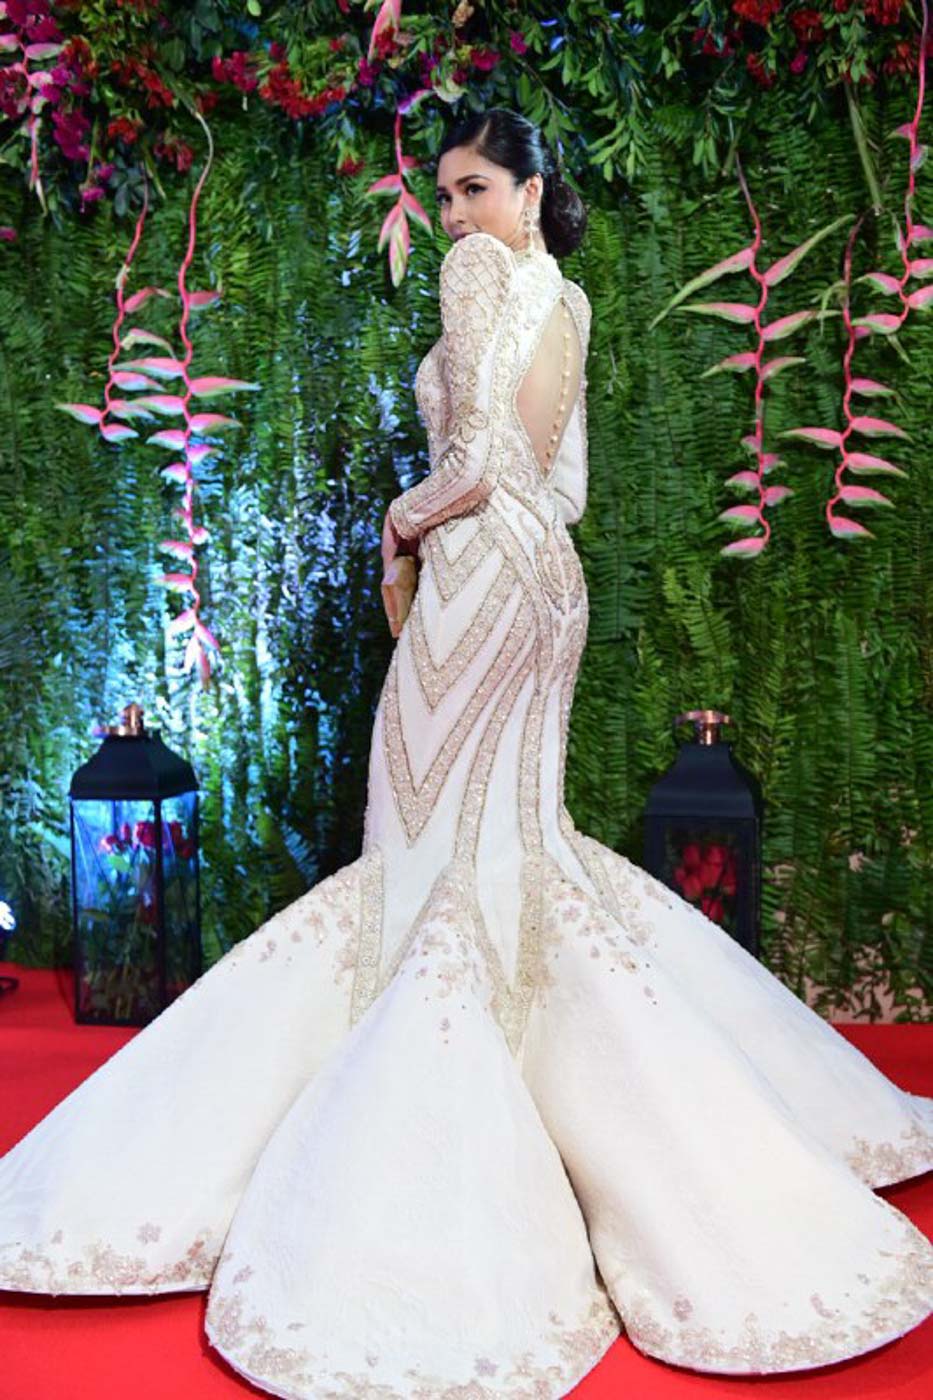 LOOK: Kim Chiu is a vision in white at the ABS-CBN Ball 2019